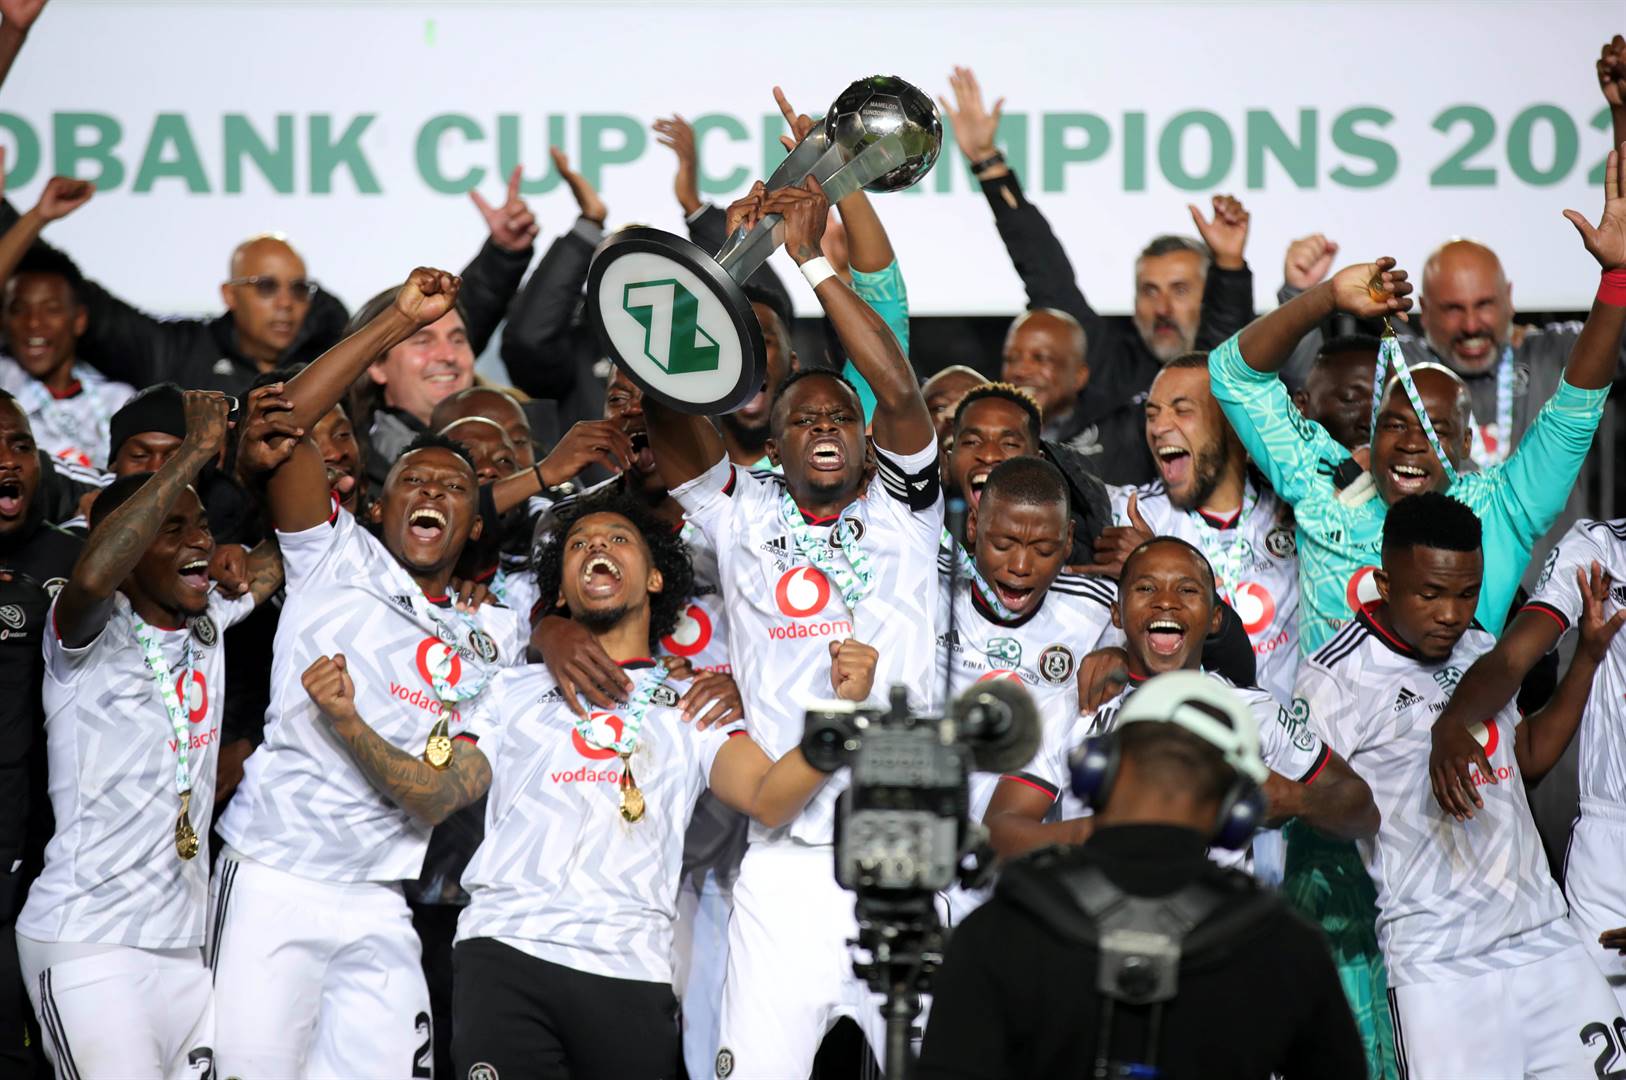 Terrence Dvzukamanja's late goal sees Pirates complete cup double